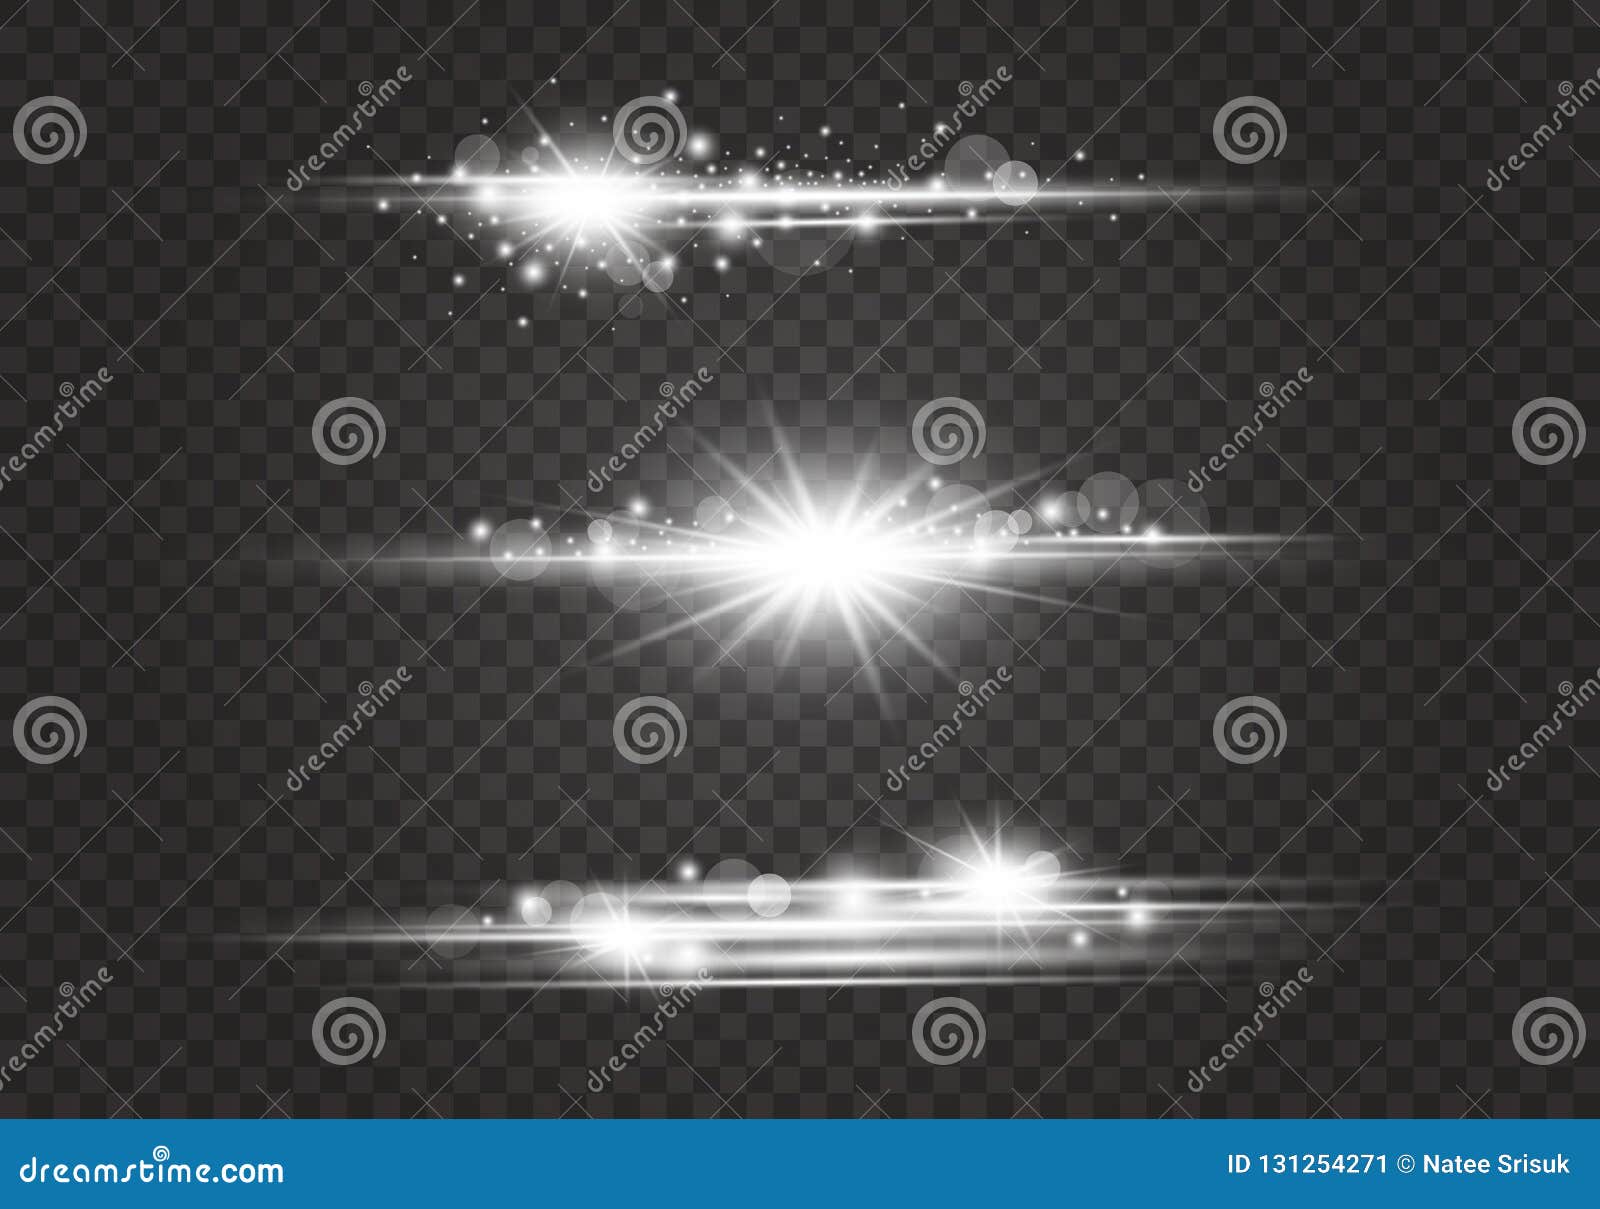 lens flares and lighting effects on transparent background